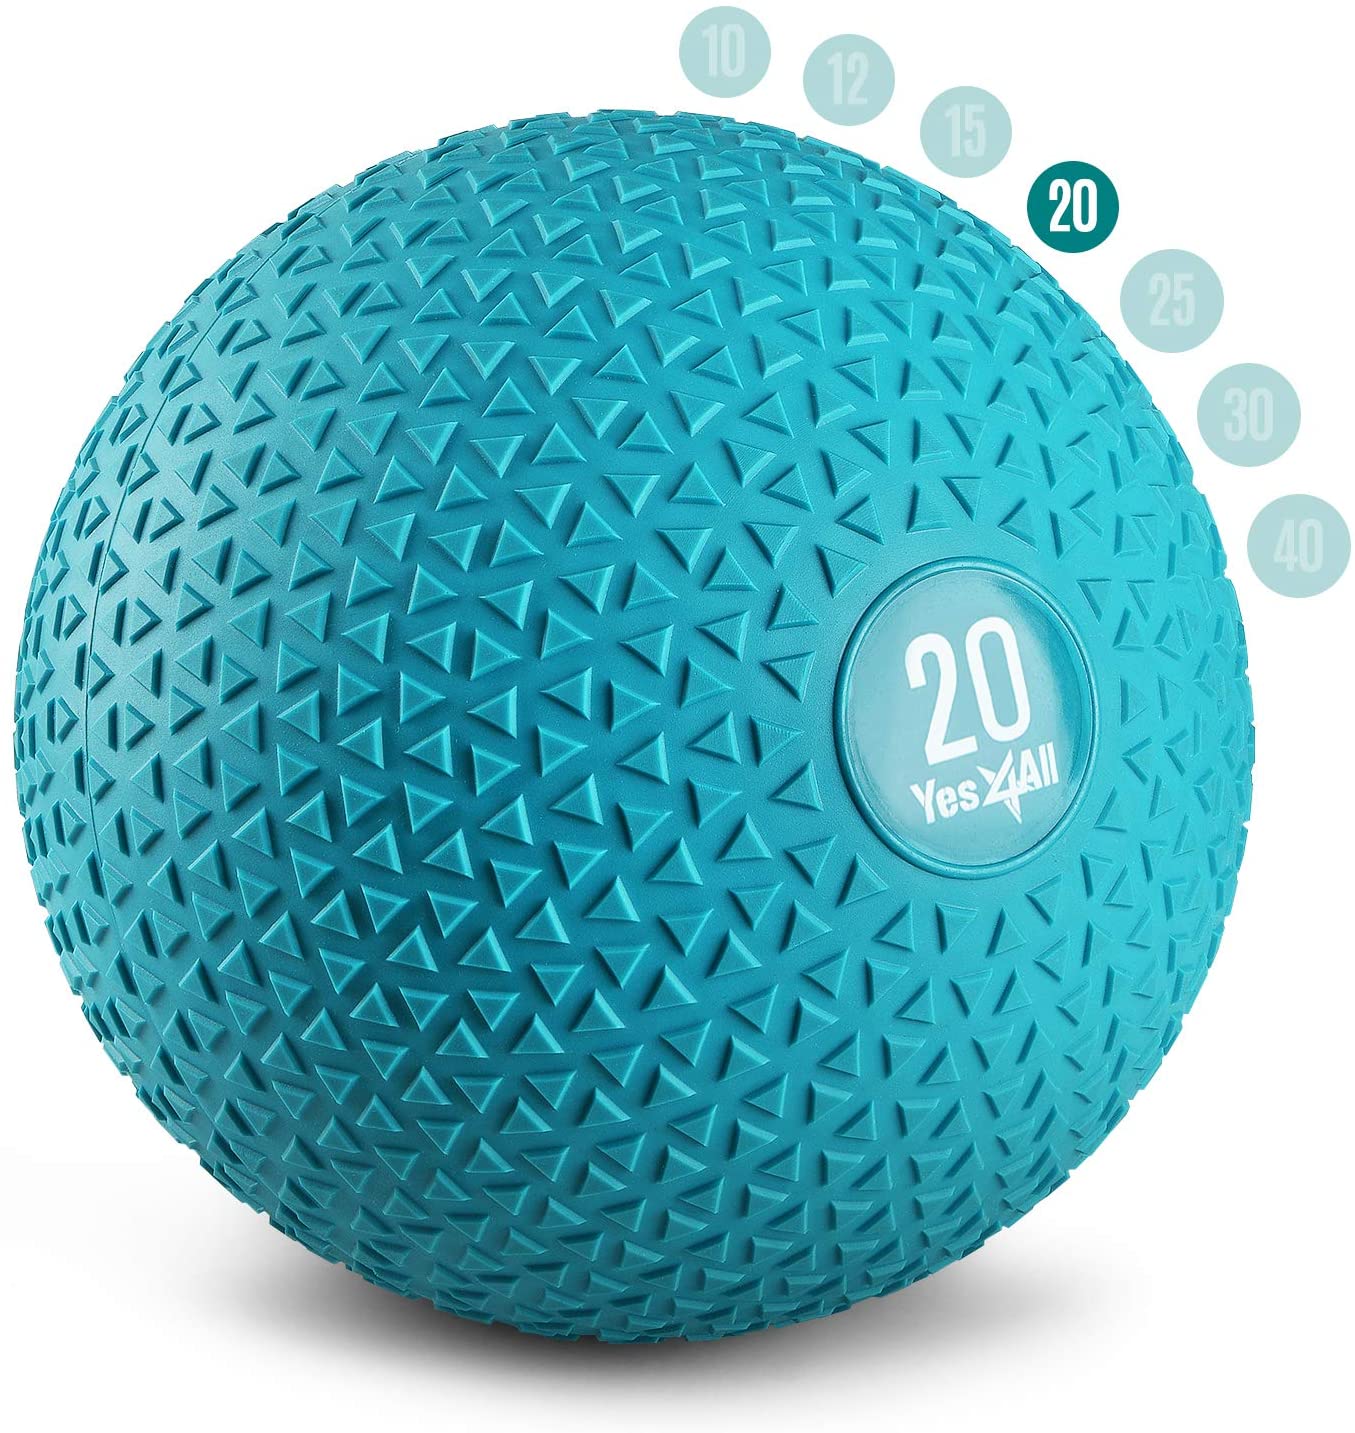 Yes4All 20lbs Slam Medicine Ball Teal - image 1 of 8